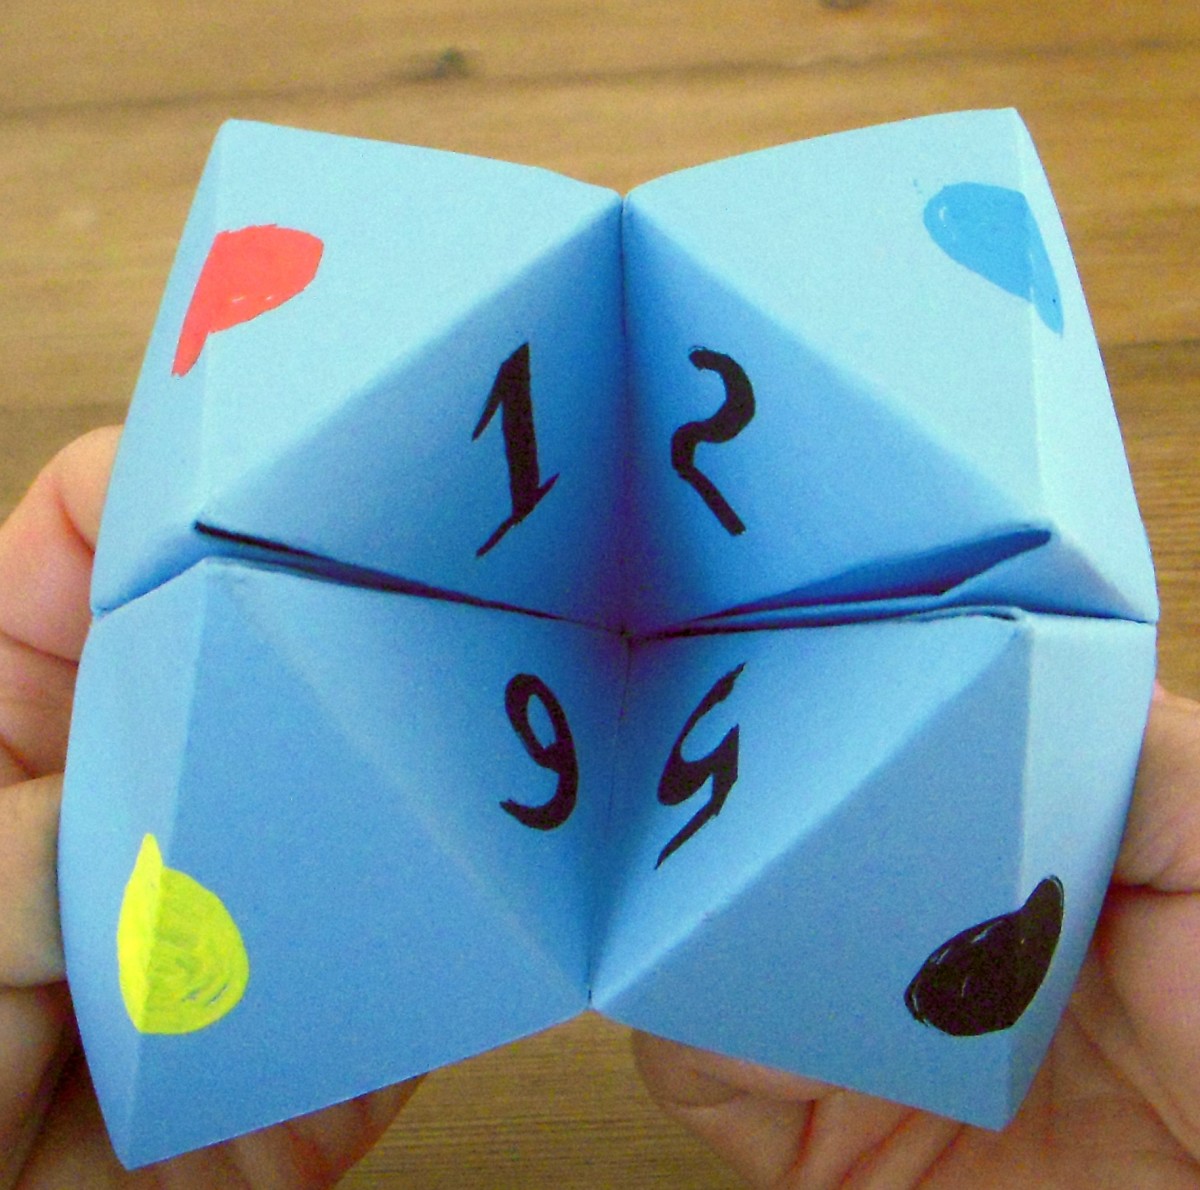 An origami paper fortune teller.